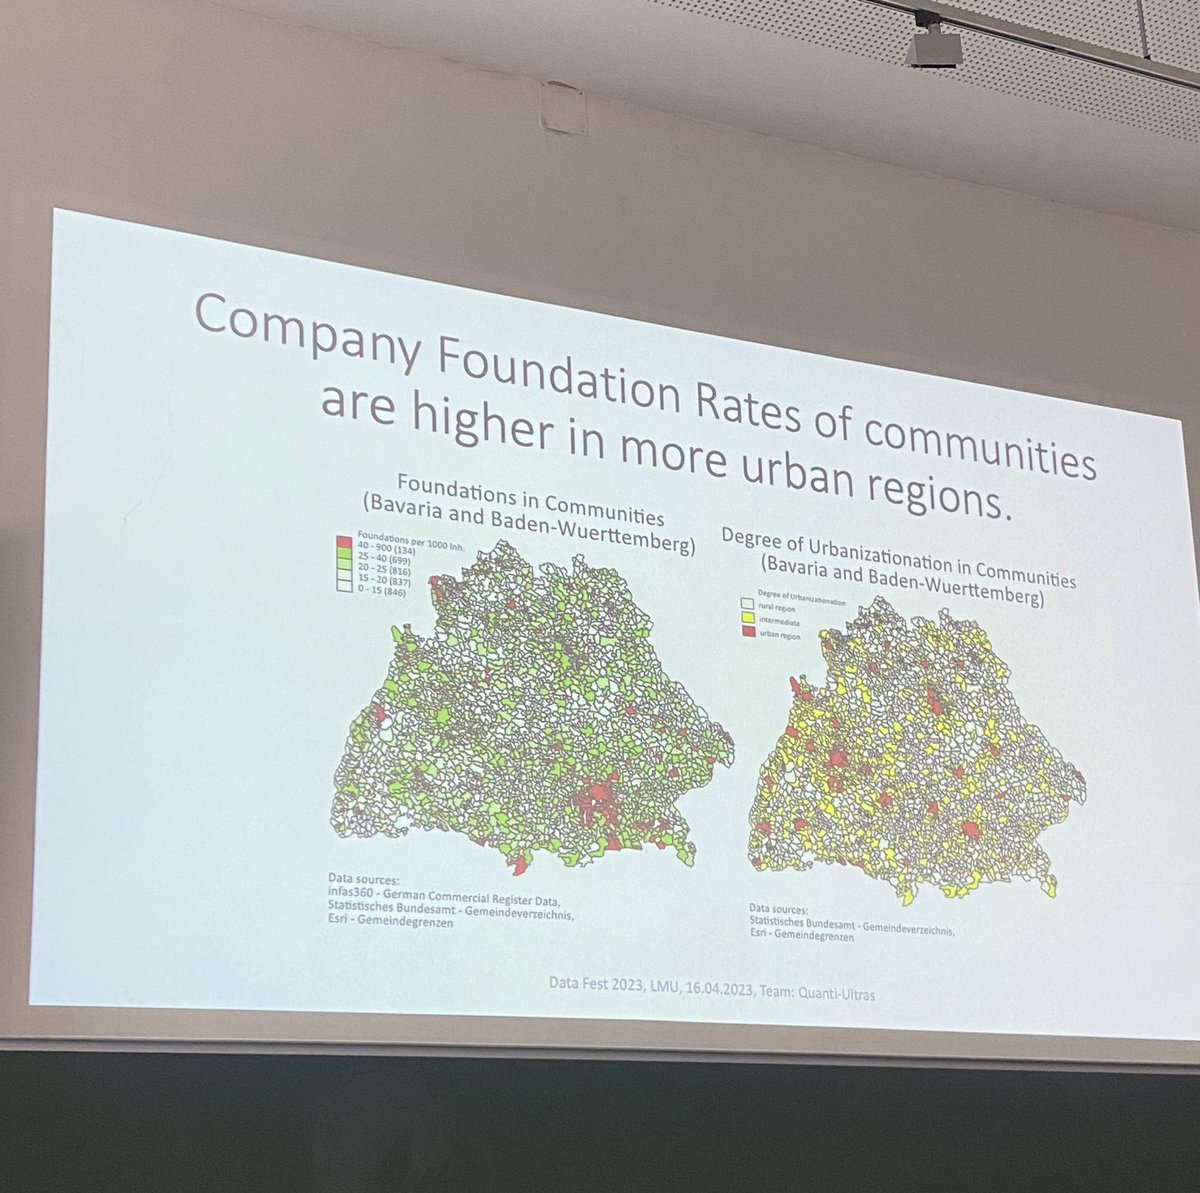 Quanti-Ultras tackled the urban-rural divide in the company register like the champions they are. We can't wait to see the results of their data-driven approach!' 📊👊 #DataFestGermany